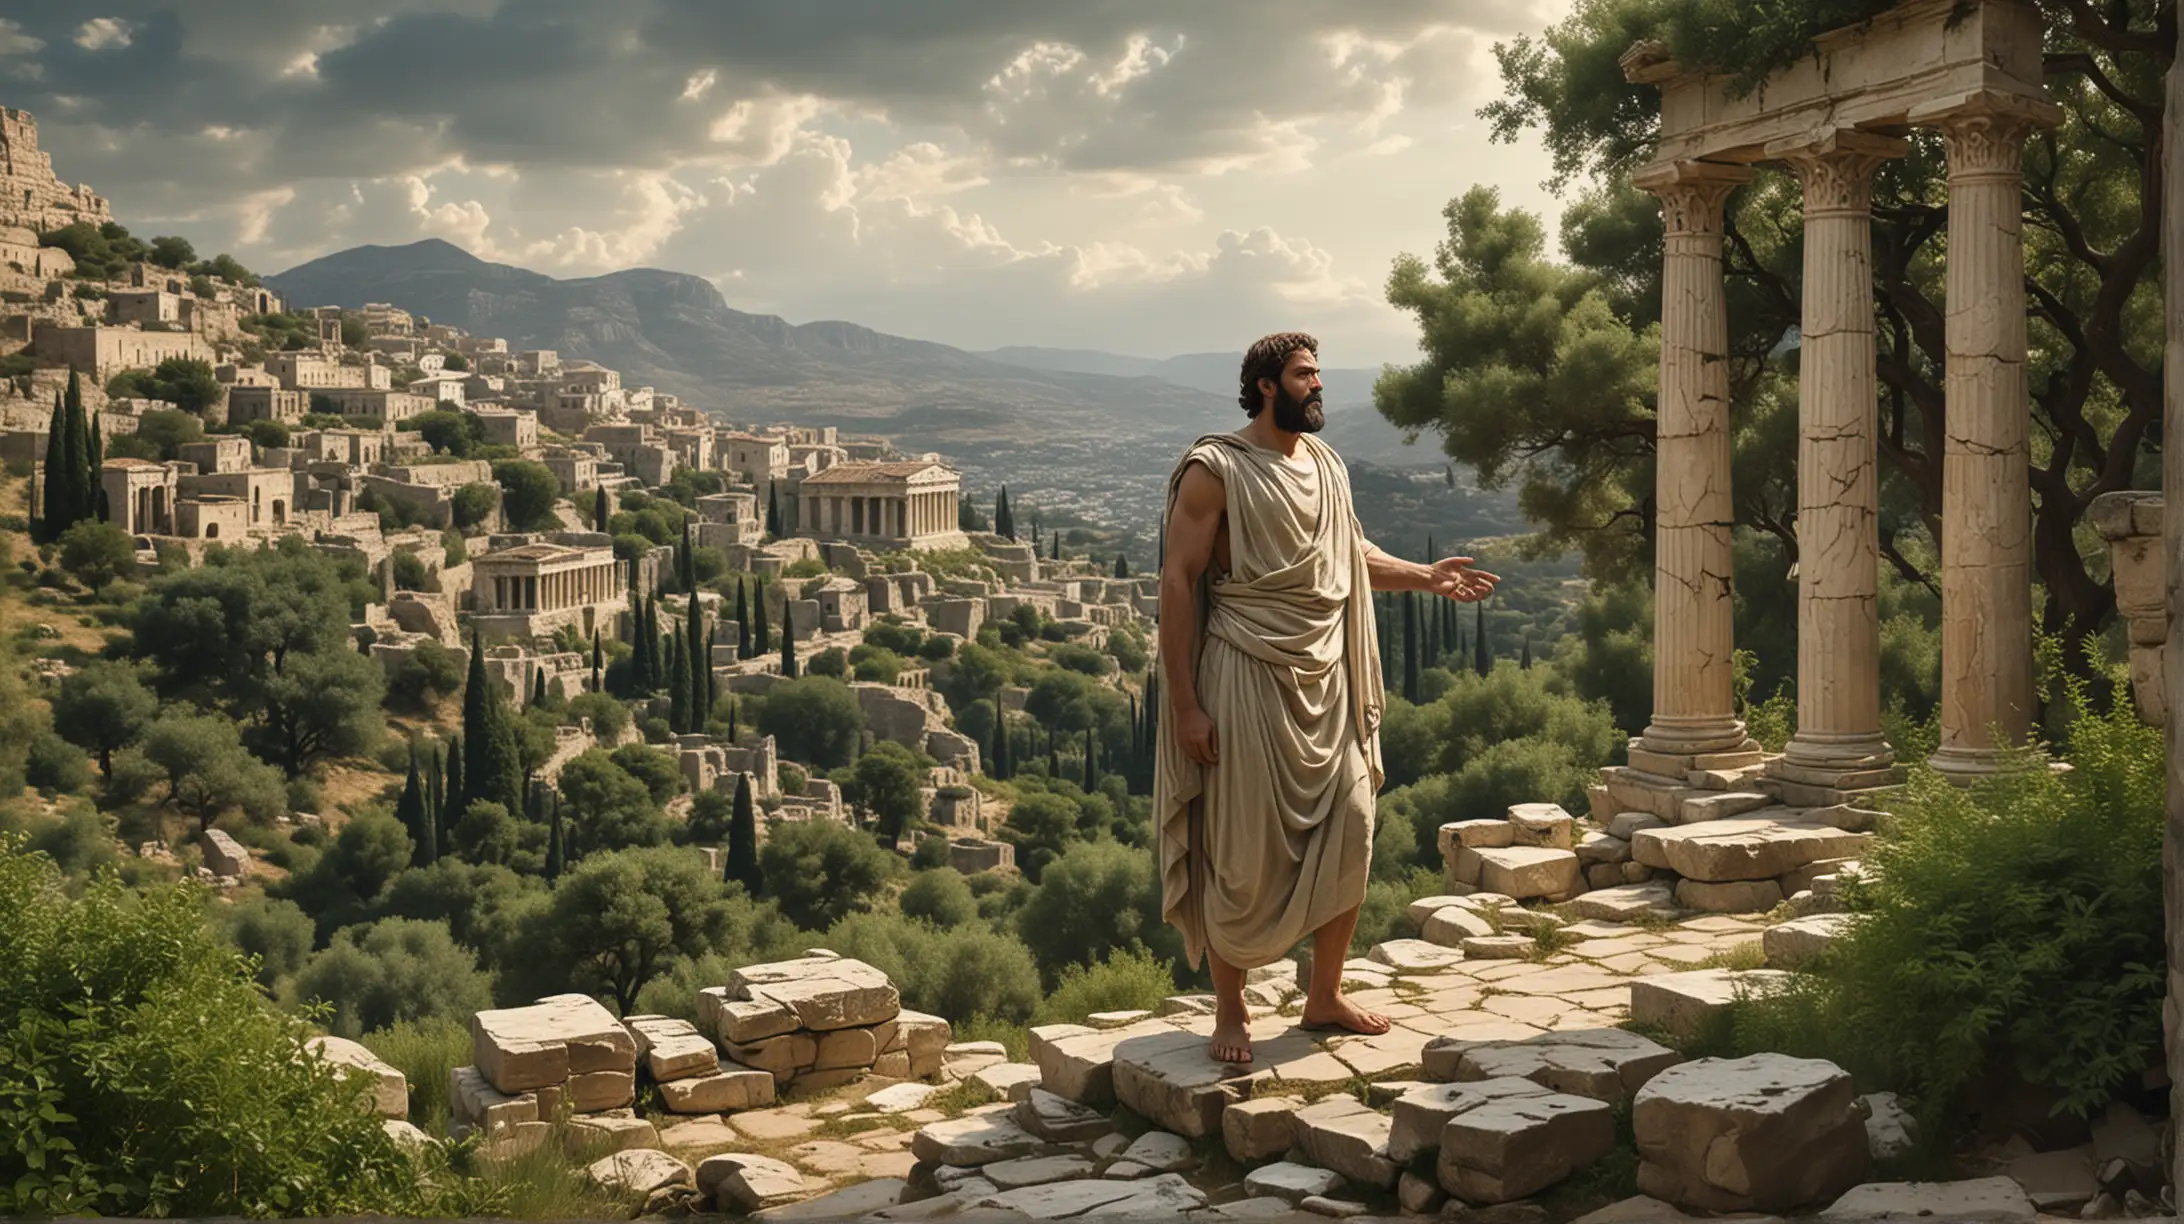 Imagine a serene scene with a Greek philosopher, standing tall and confident, surrounded by lush greenery and ancient ruins. He gestures with authority, emphasizing his points on Stoic principles in interpersonal relationships. Image Description: In this image, we see a realistic depiction of a Greek philosopher, possibly resembling Epictetus or Marcus Aurelius, standing amidst a picturesque landscape of verdant hills and crumbling columns. His physique exudes strength and wisdom, with a determined expression as he speaks passionately about Stoic ideals in relationships.